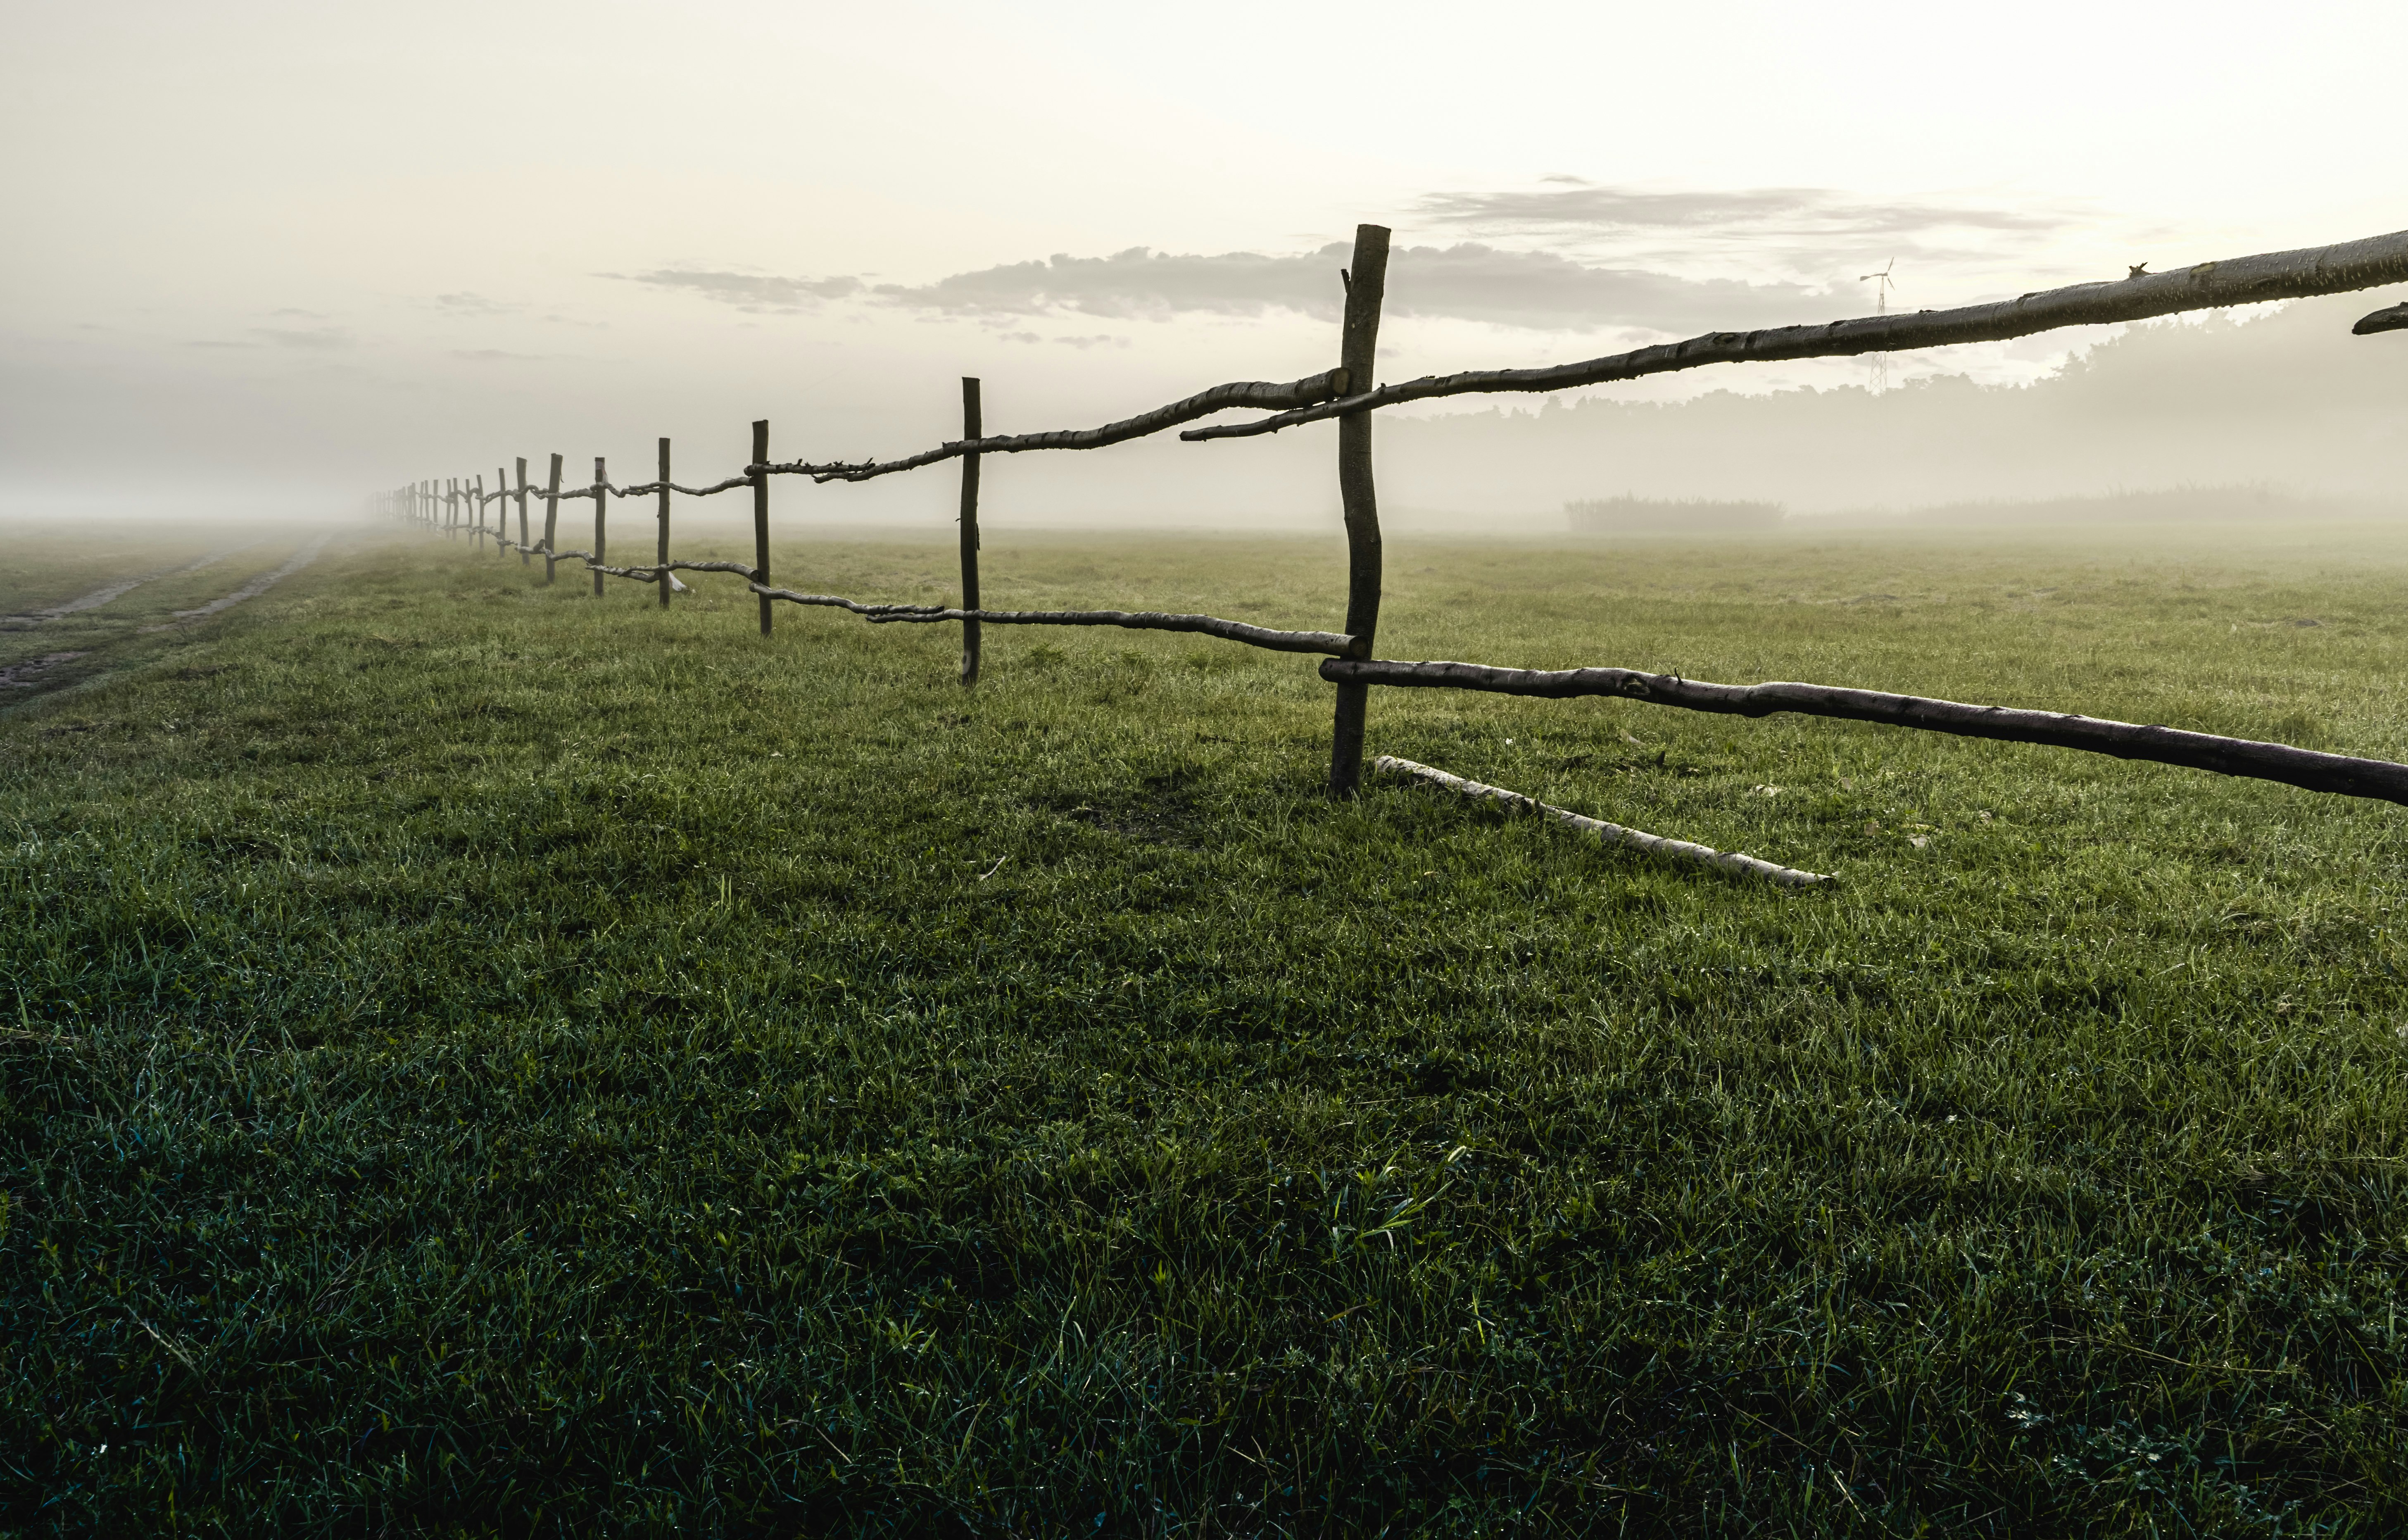 brown wooden fence on green grass field during daytime